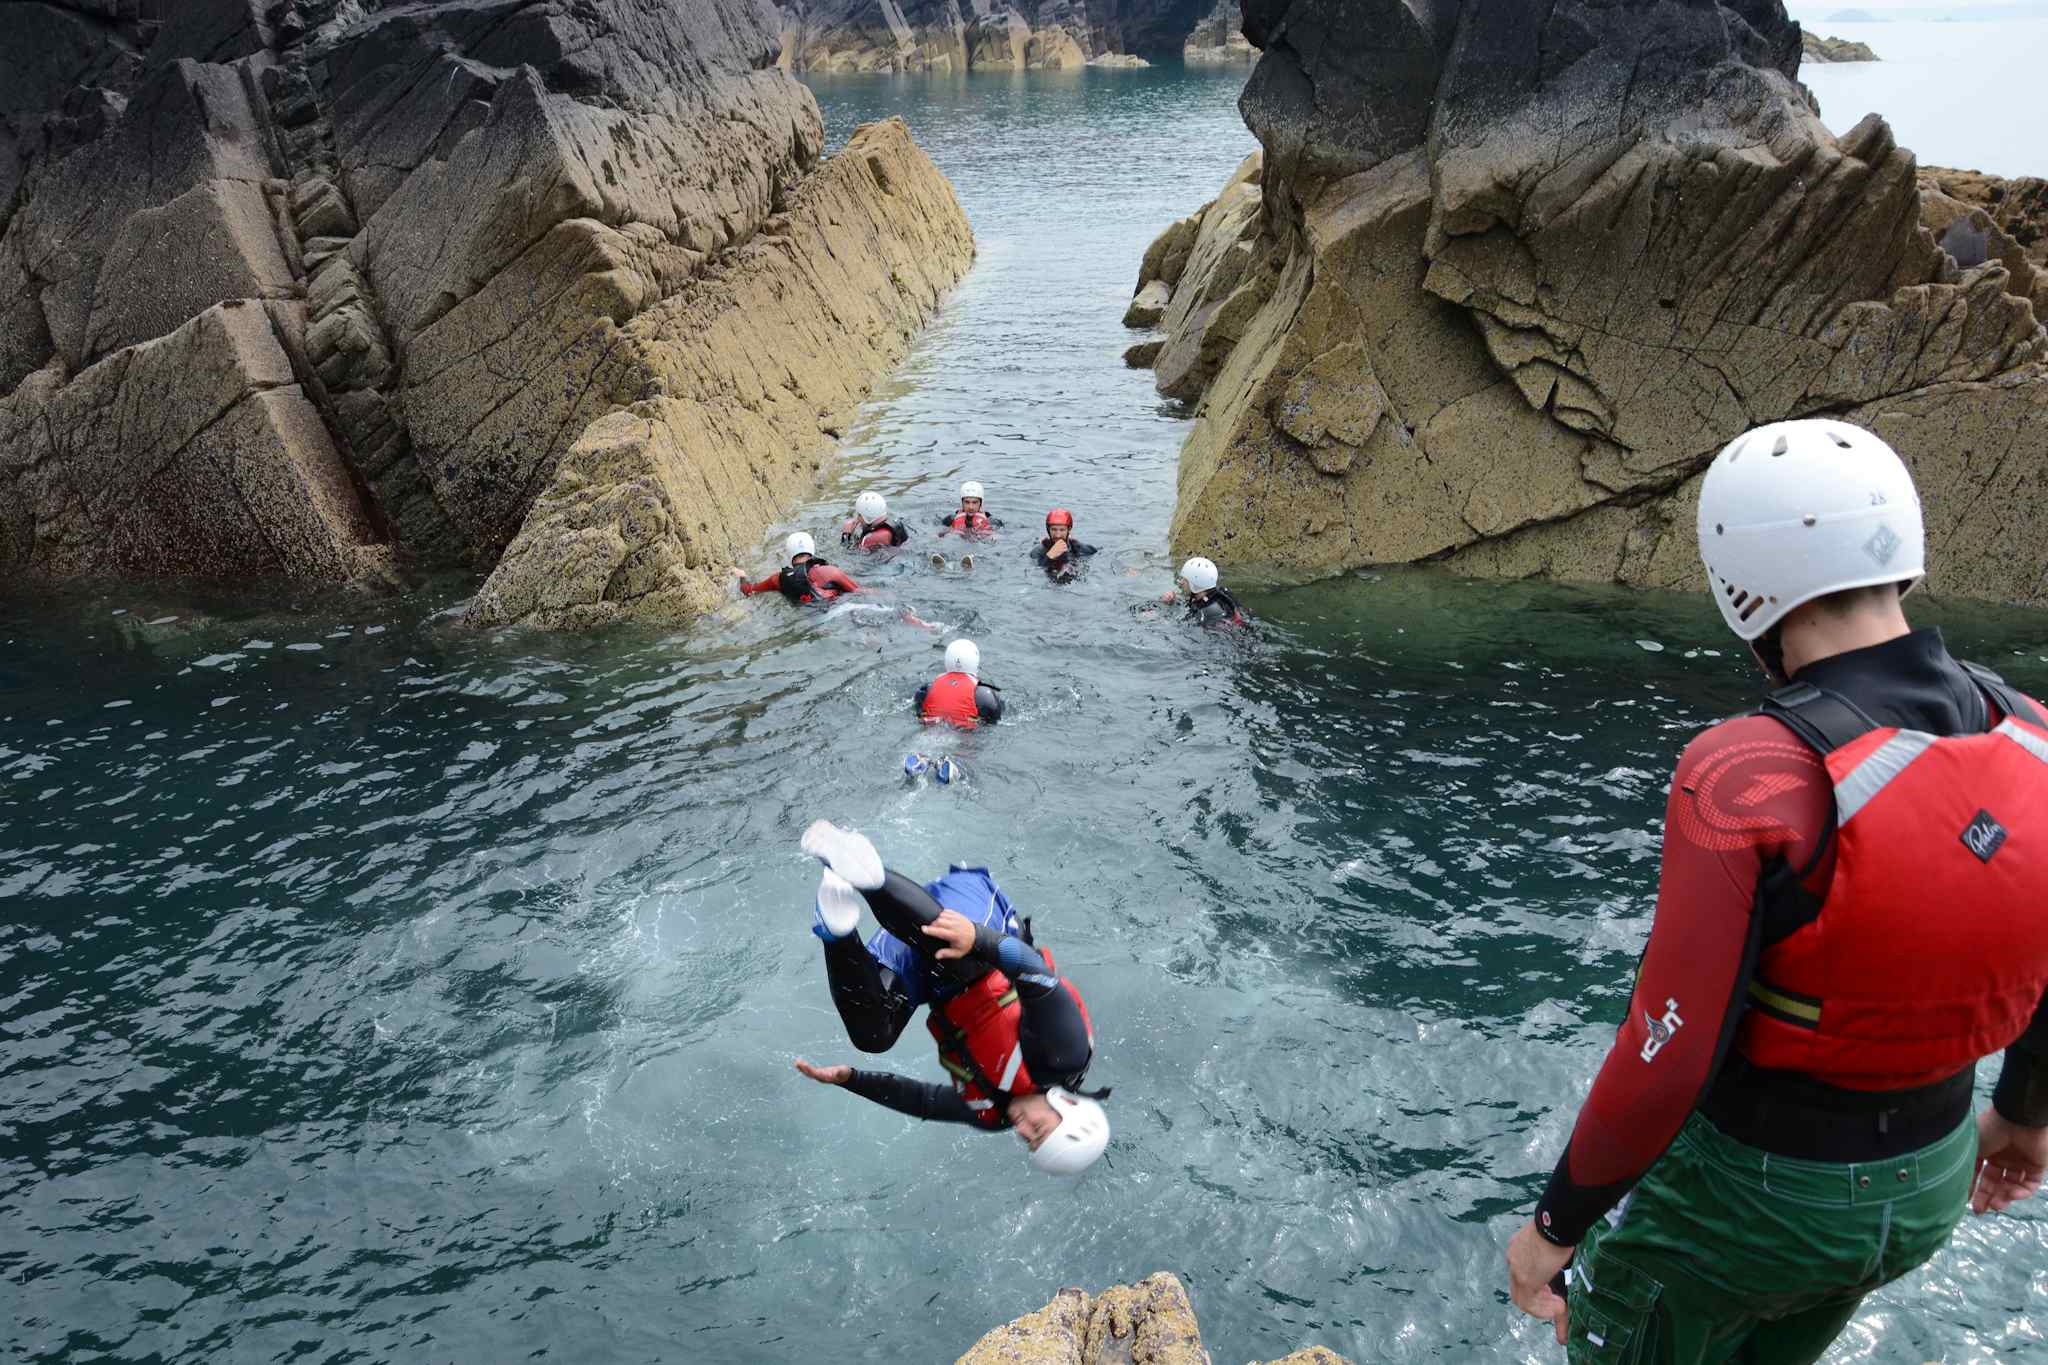 Take on the 24-hour Coastal Challenge in Pembrokeshire